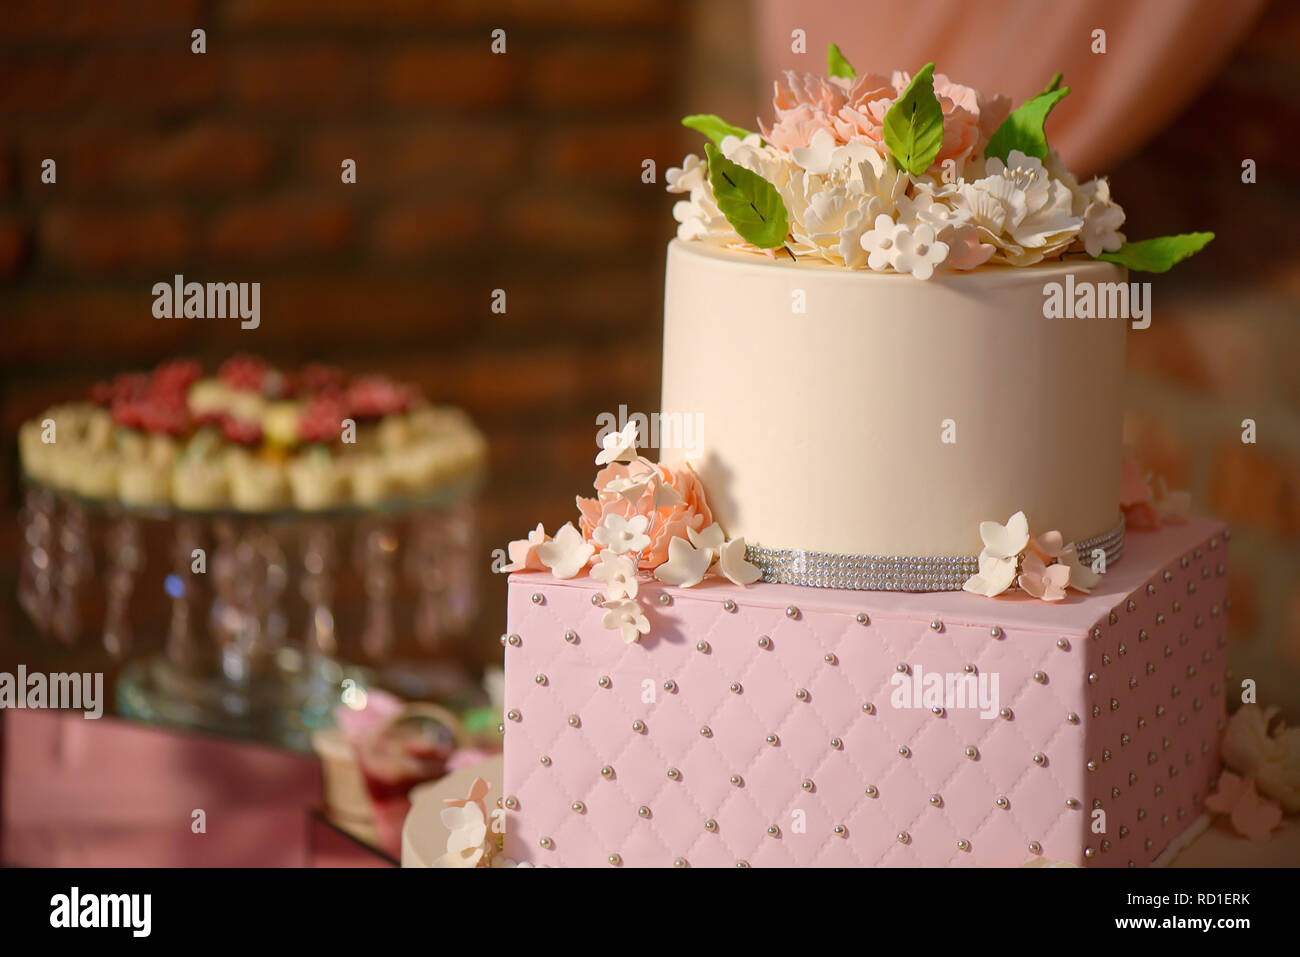 Large assortment of bite-sized cakes and a large three tiered cake embellished with velvet icing and sugar flowers, delicious dessert display Stock Photo